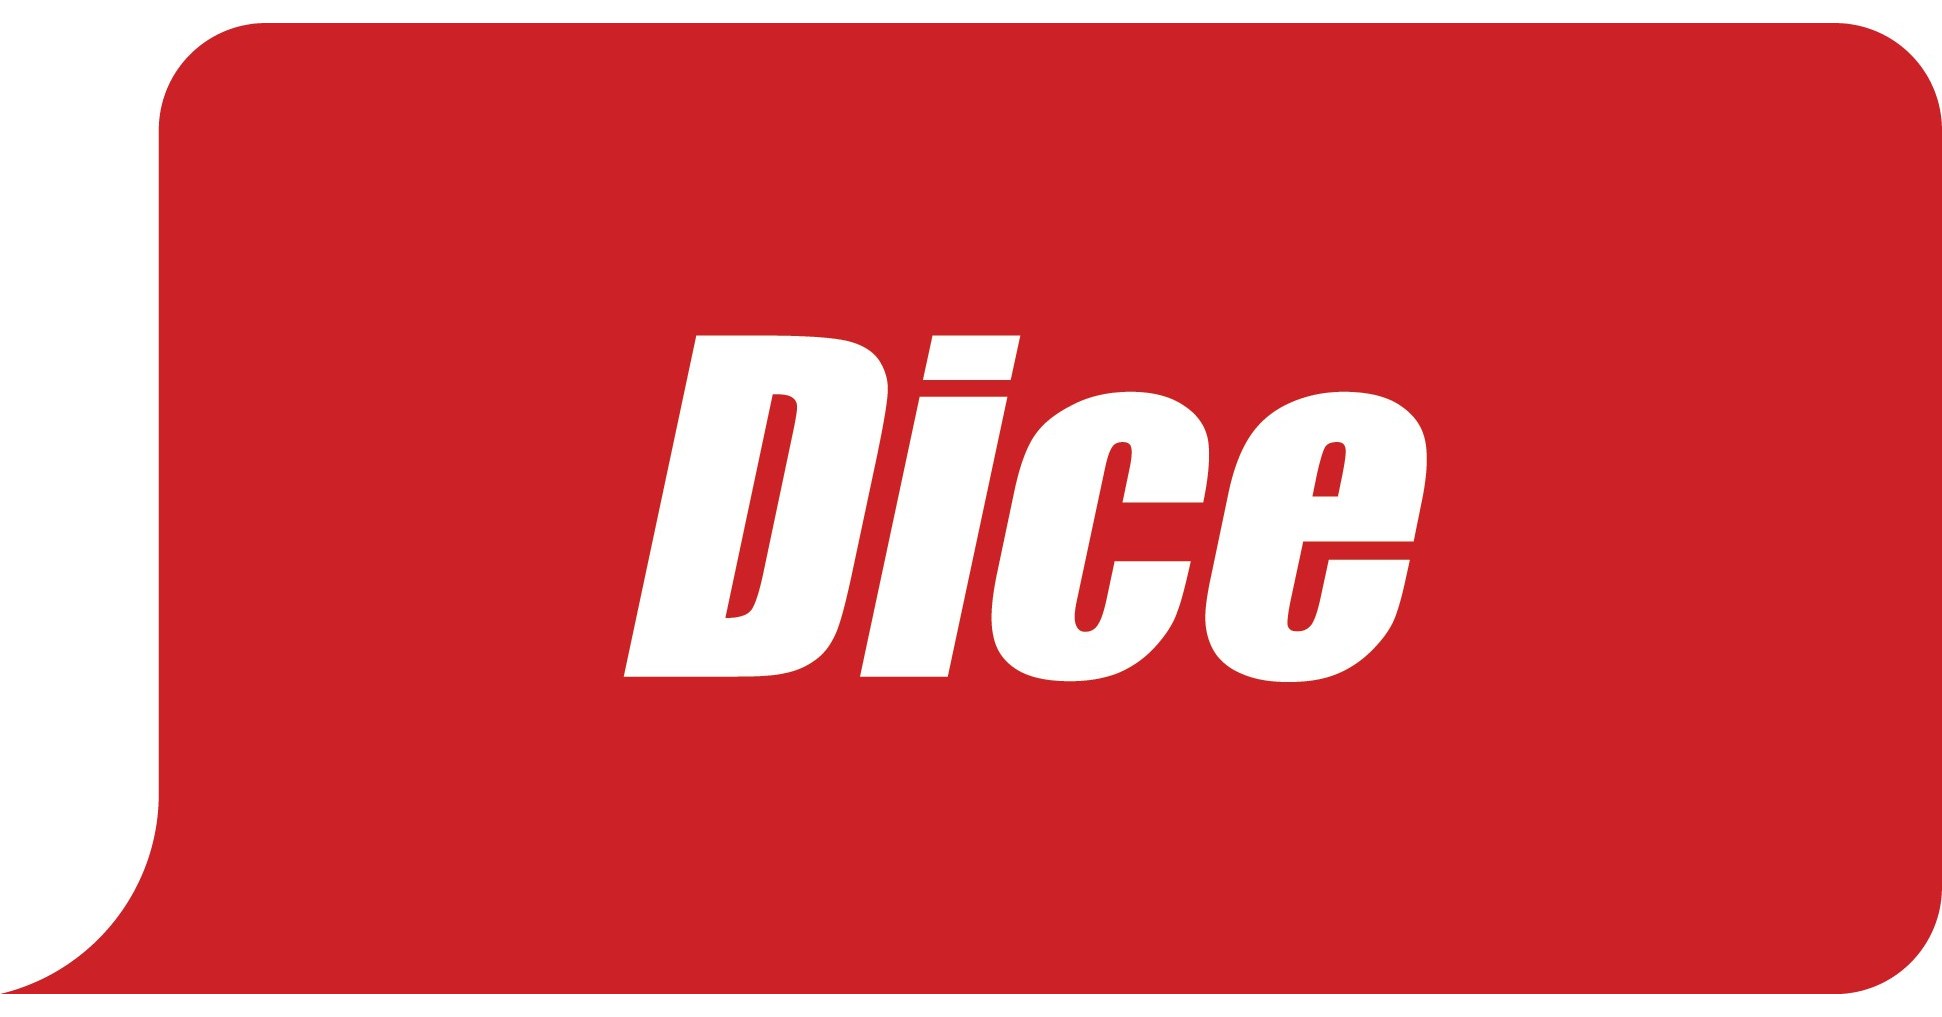 Find Positions in Tech with Dice Jobs